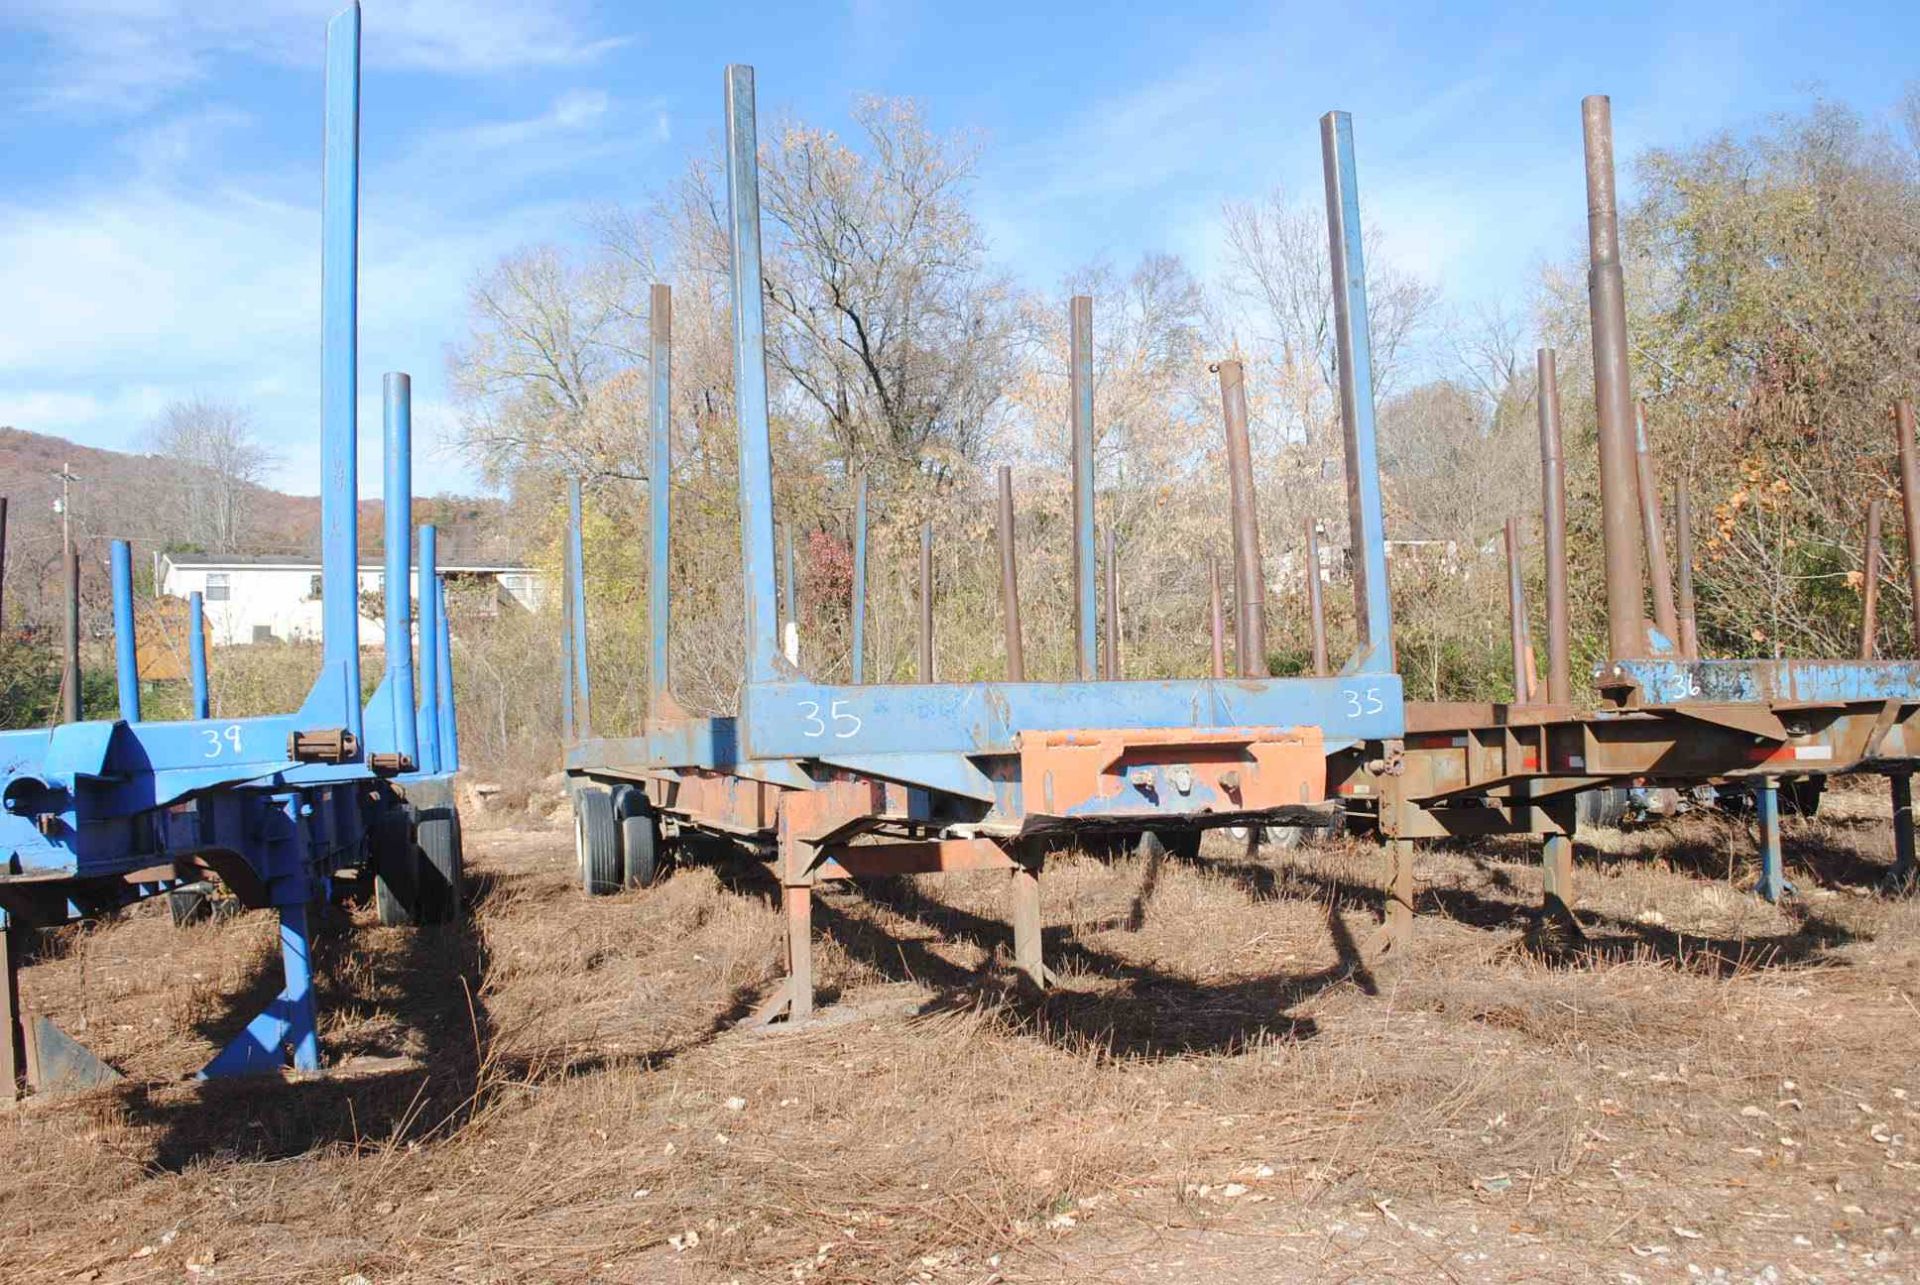 40' DOUBLE BUNK LOG TRAILER; NO TITLE, BILL OF SALE ONLY